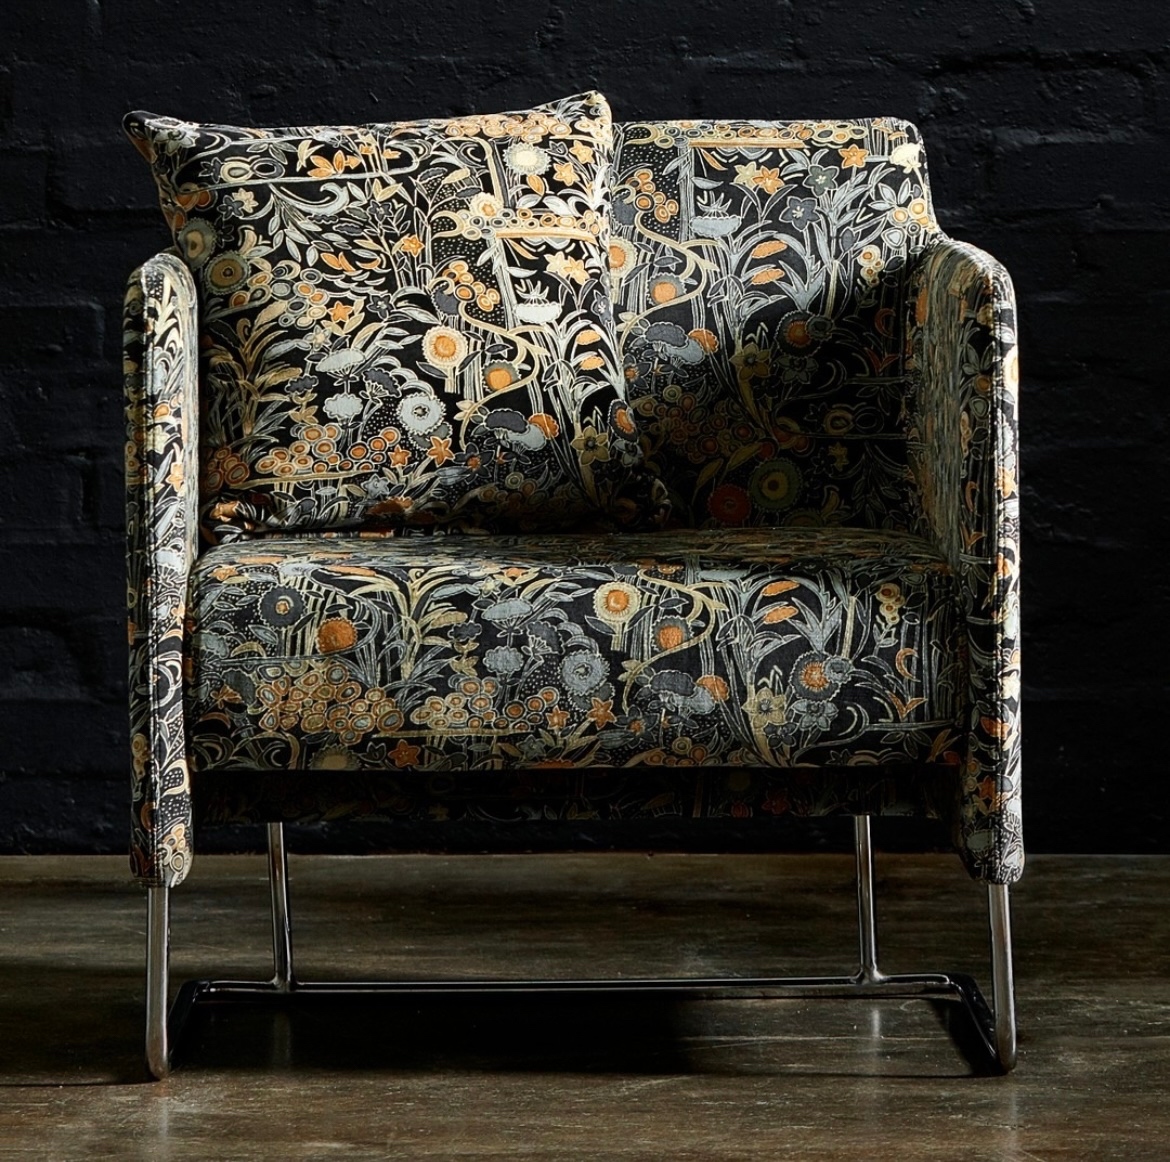 Moody hues meet refined luxury with @designarchives’ arts and crafts inspired Tiffany Onyx printed velvet fabric. 

l8r.it/Loqp
​​​​​​​​​​​​​​​​
#thedesignarchives #thelistbyhouseandgarden   #interiortextiles #interiordecor #interieurinspirate #britishinteriors